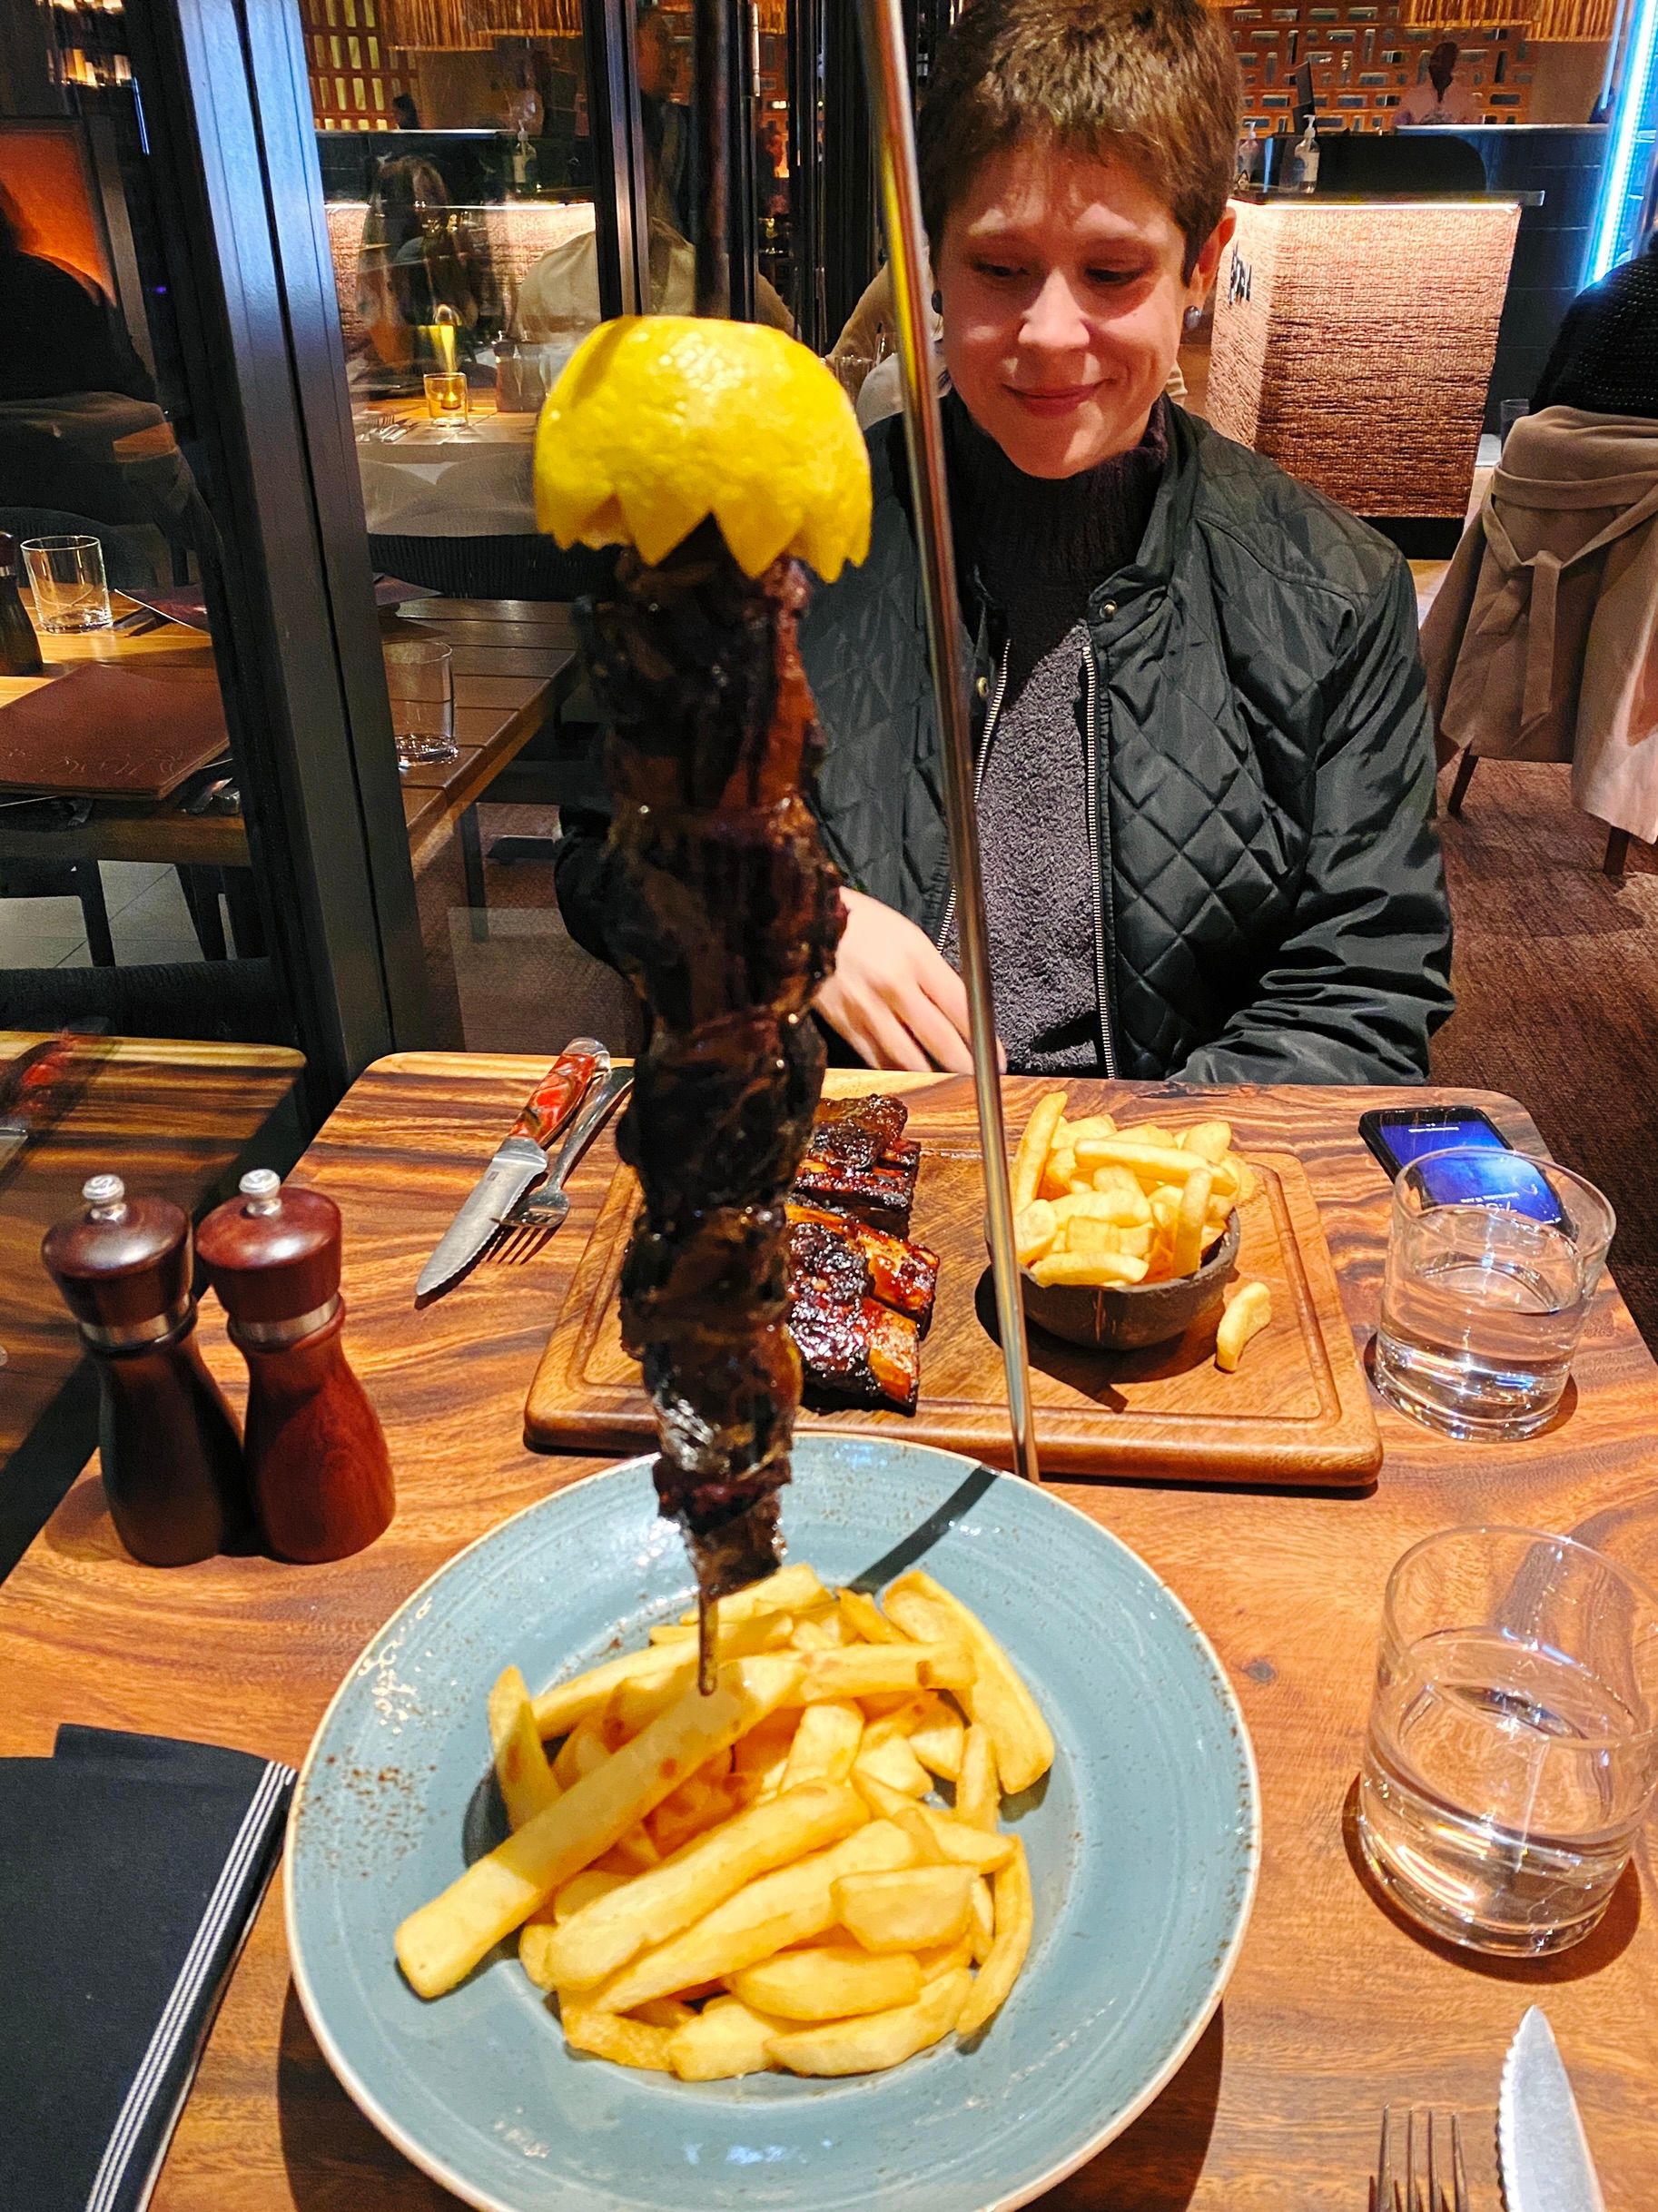 A photo of a metal contraption that has a skewer through multiple pieces of delicious-looking lamb and is hanging the skewer vertically above a plate of chips.